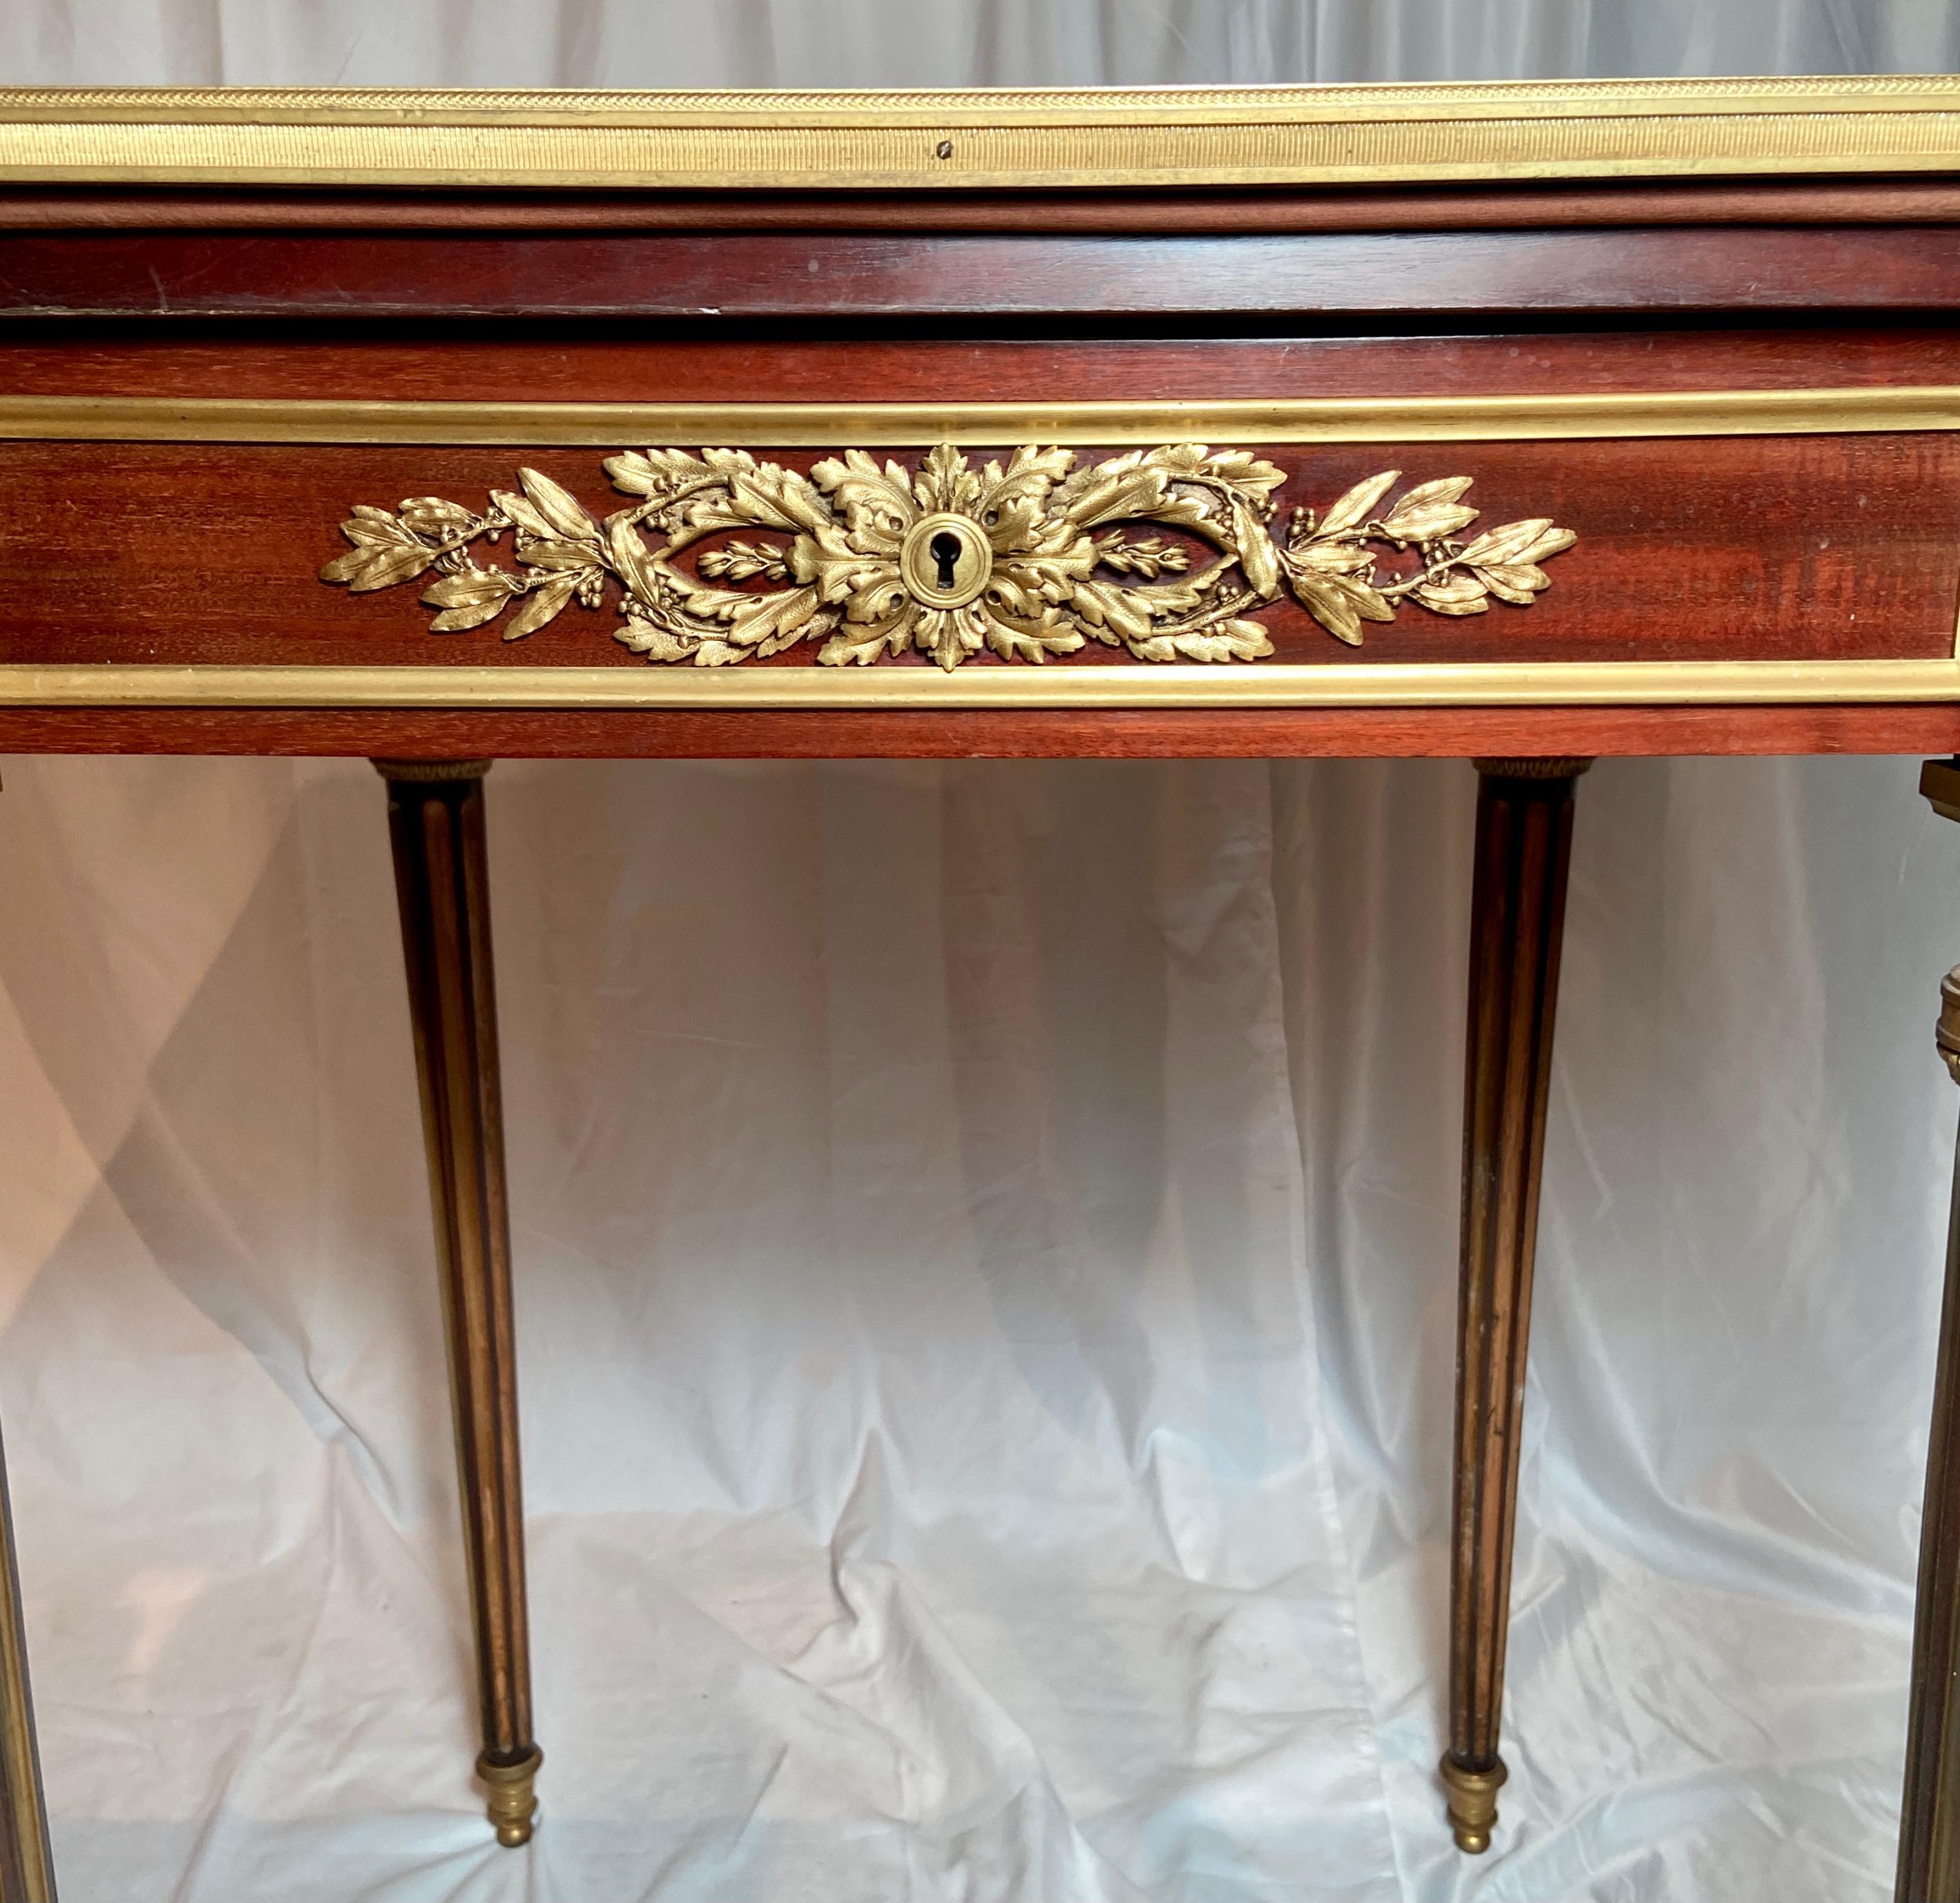 Antique French Mahogany & Ormolu Handkerchief Card Table Signed Sormani, Ca 1870 In Good Condition For Sale In New Orleans, LA